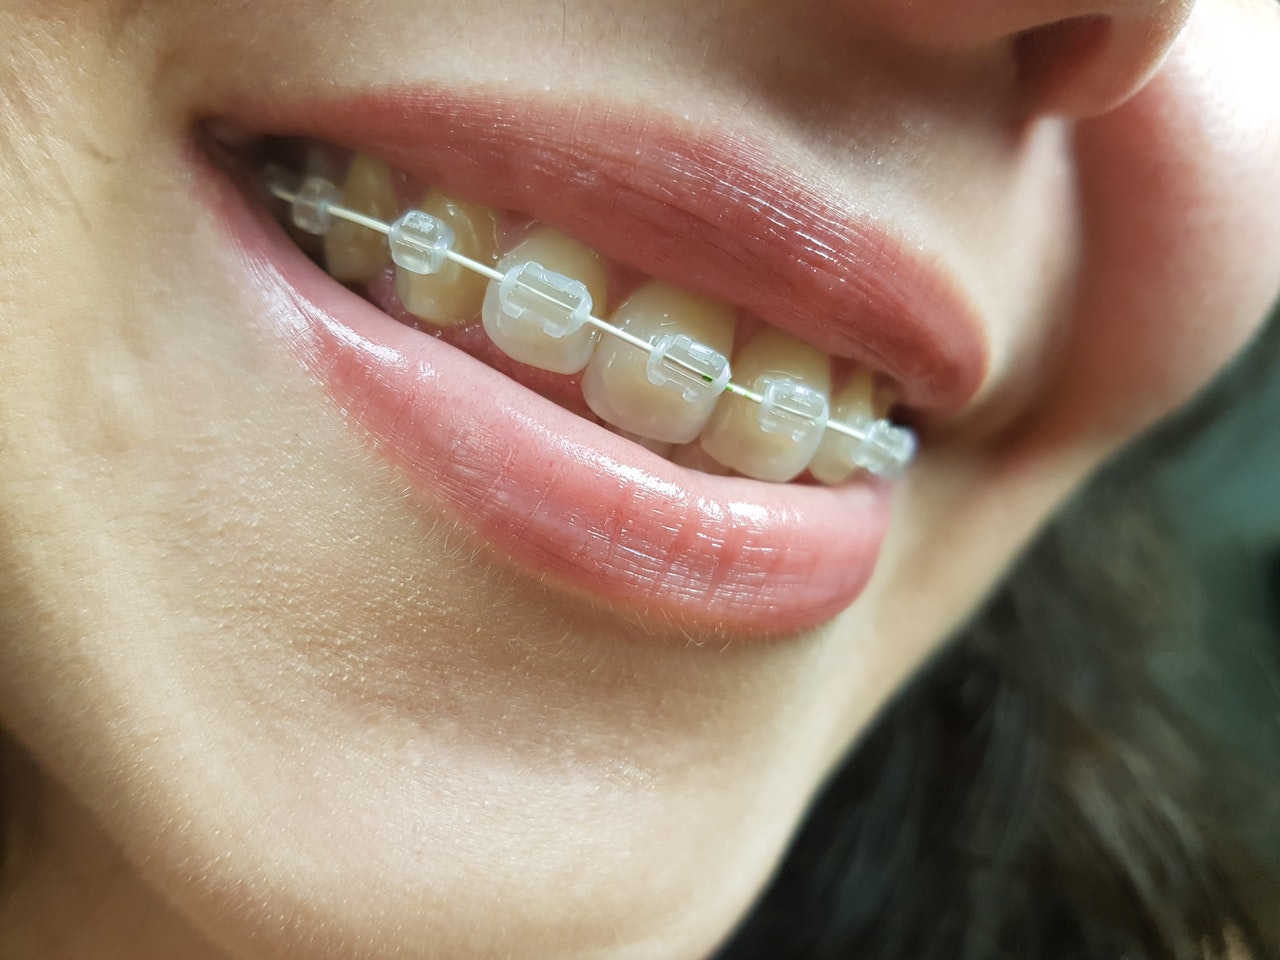 Adult Braces On The Rise